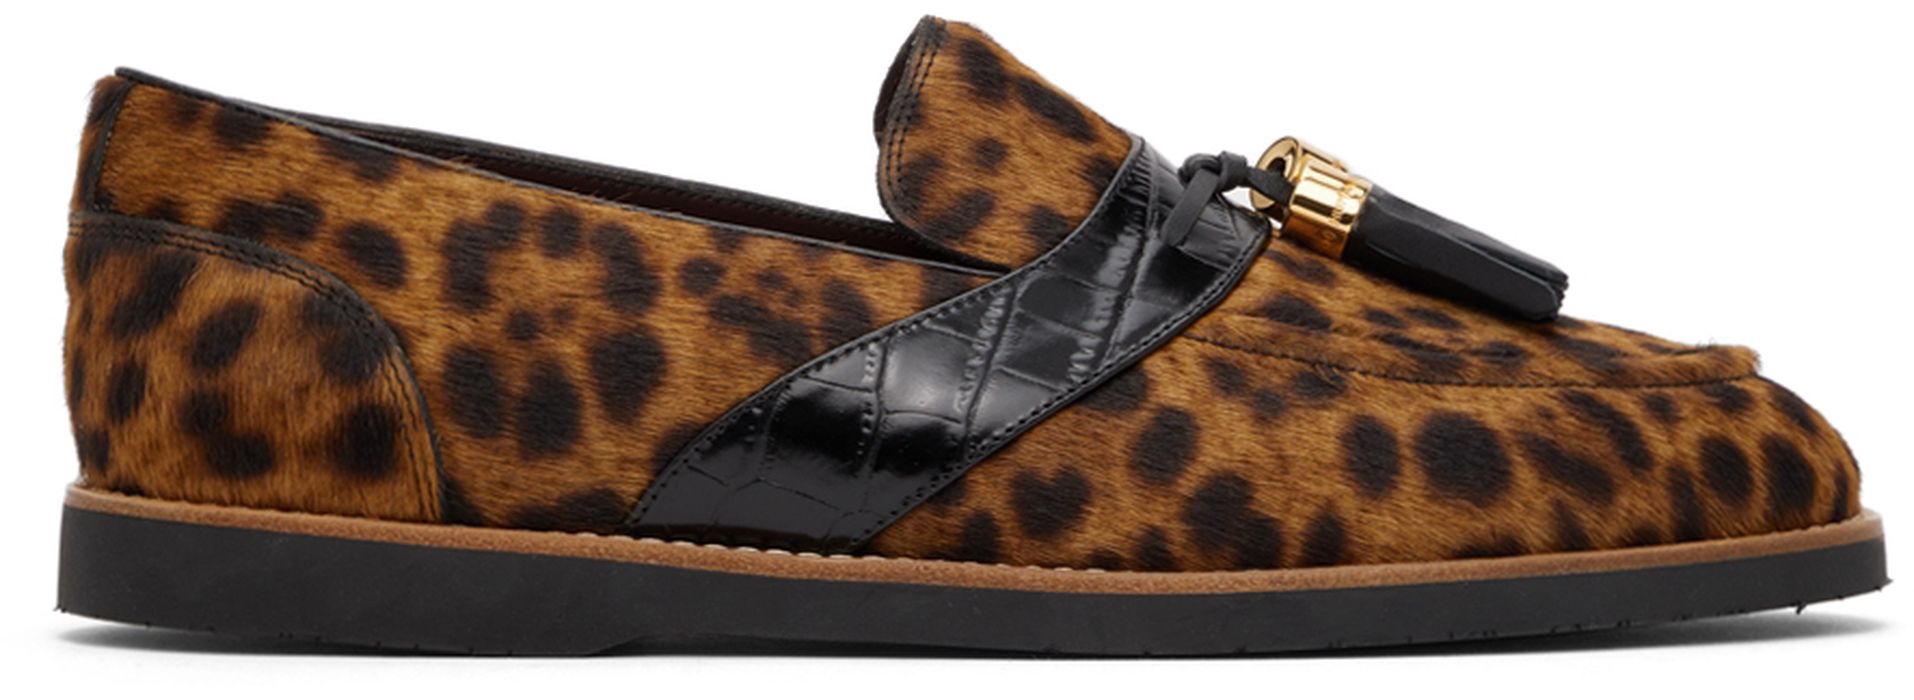 Human Recreational Services Brown & Black Del Rey Leopard Loafers